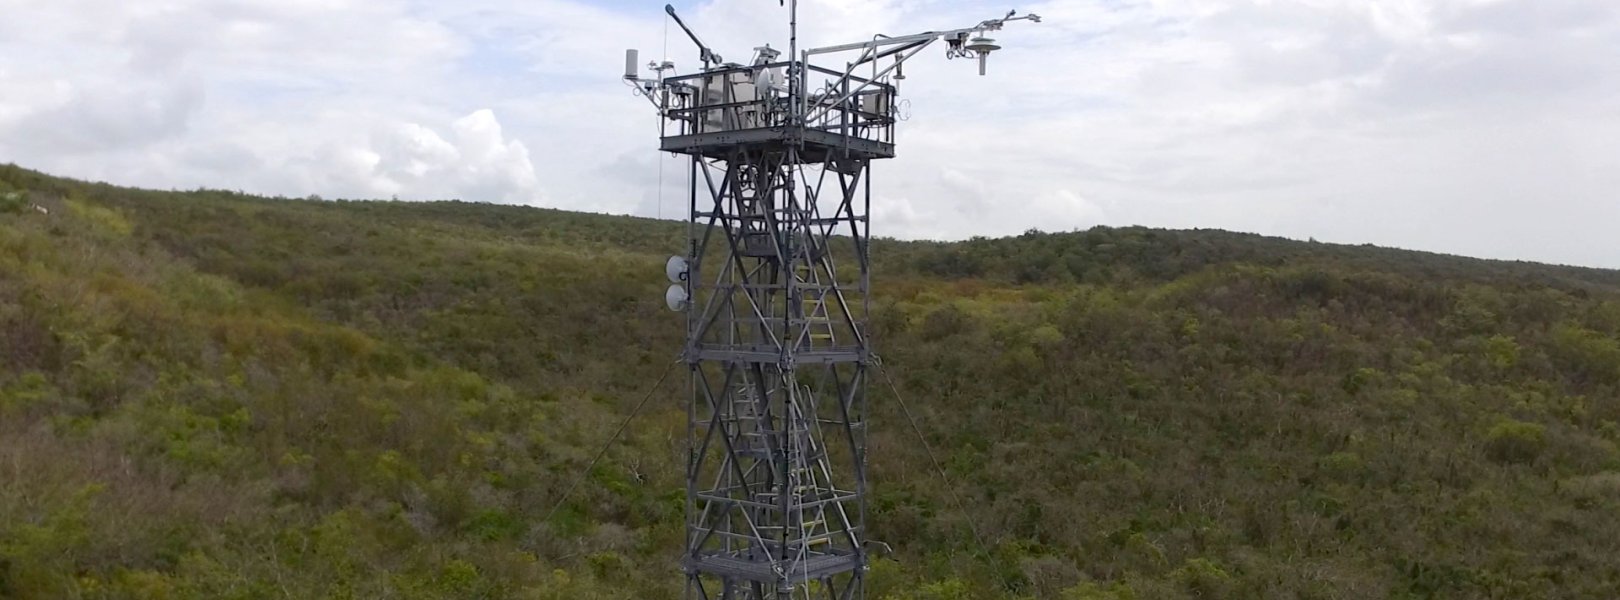 Flux tower at the GUAN field site in Puerto Rico